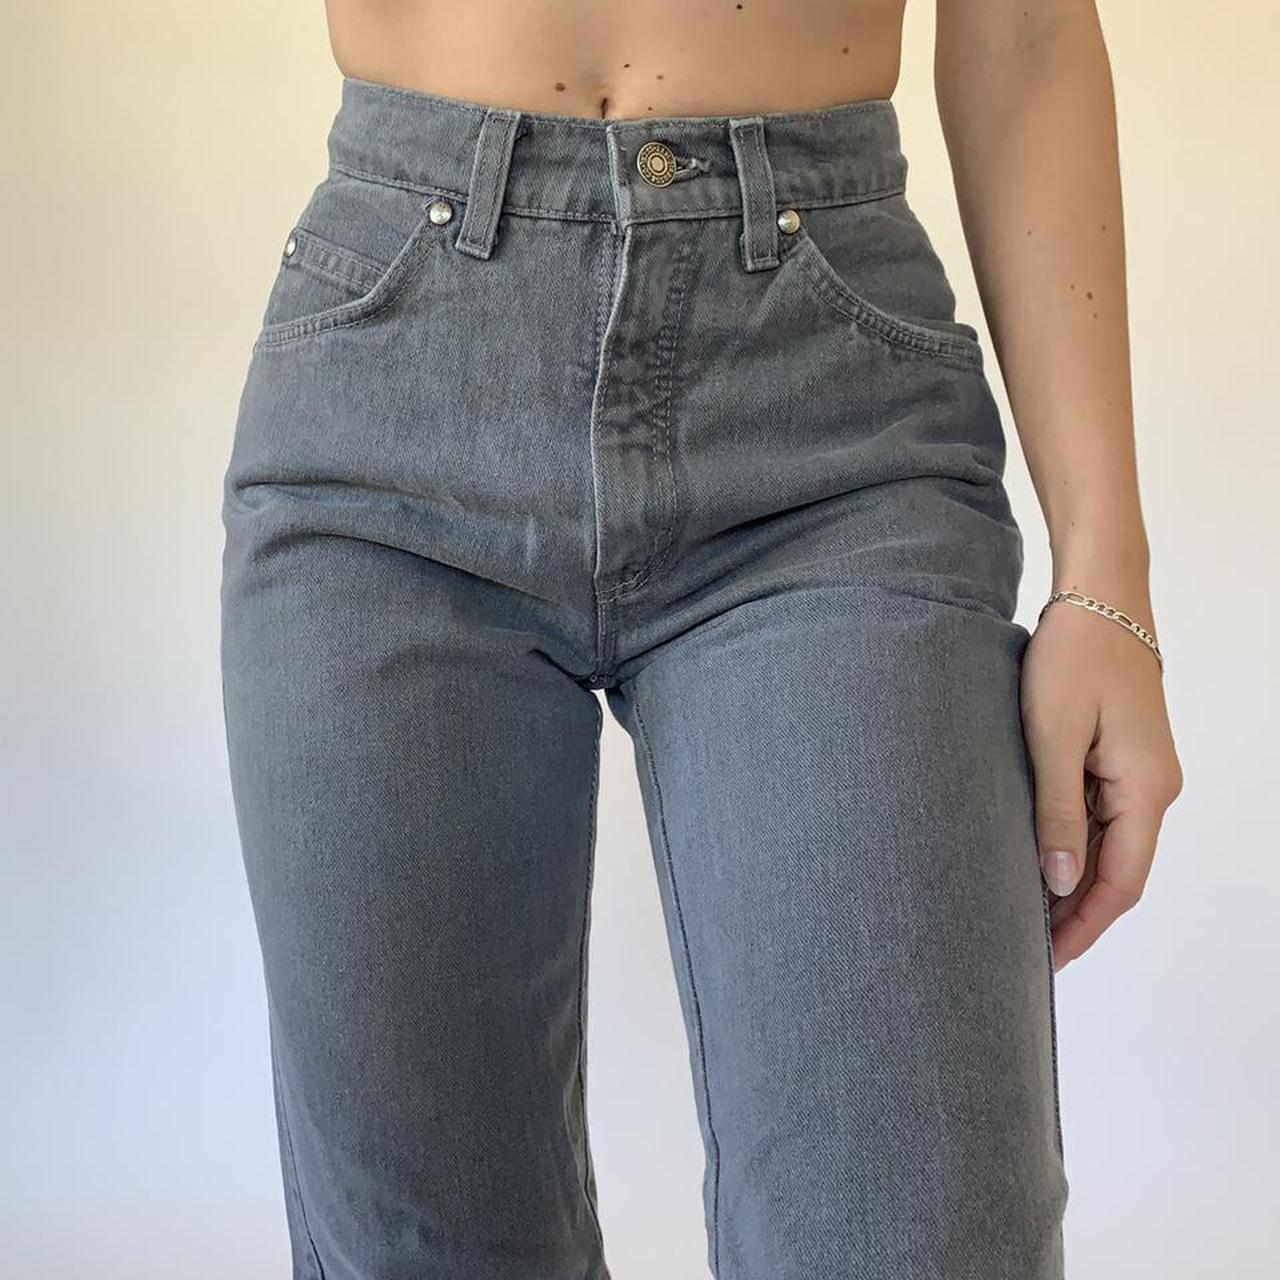 Vintage 1990s Levi’s 901 jeans. High waisted with a... - Depop